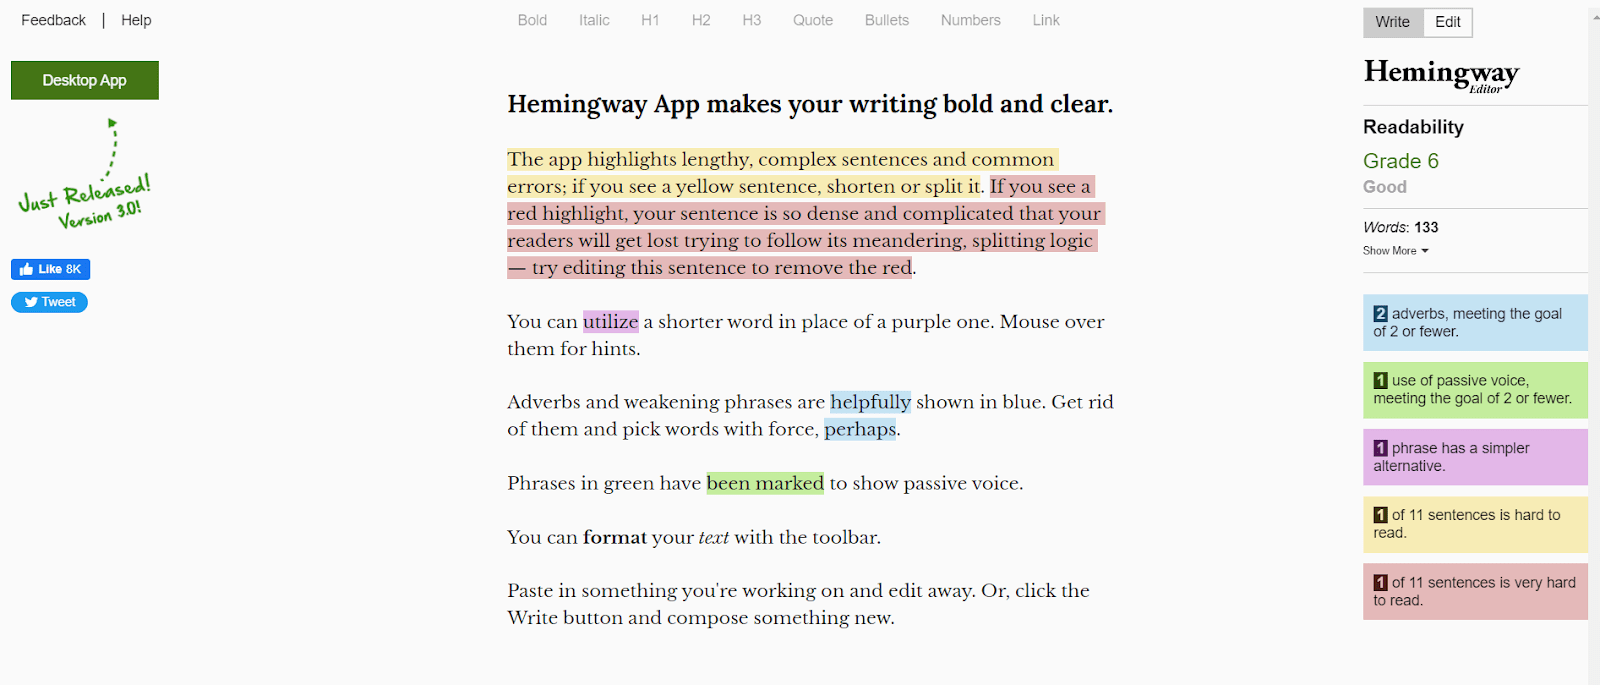 Introductory page of Hemingway app showing different options to improve the content.